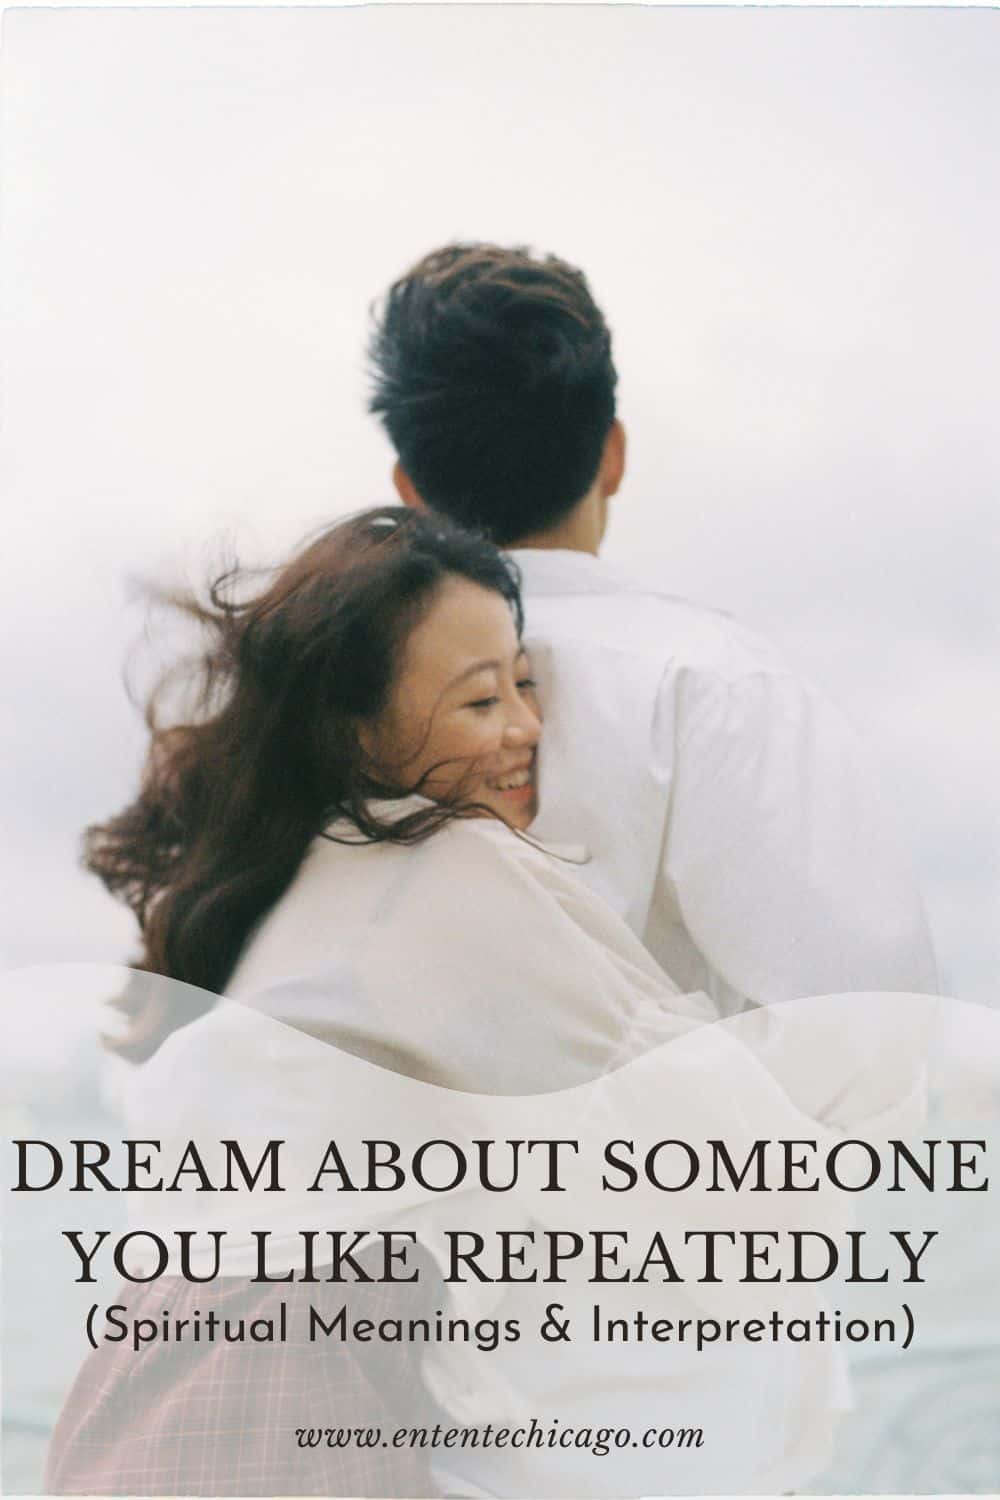 Dream About Someone You Like Repeatedly (Spiritual Meanings & Interpretation)